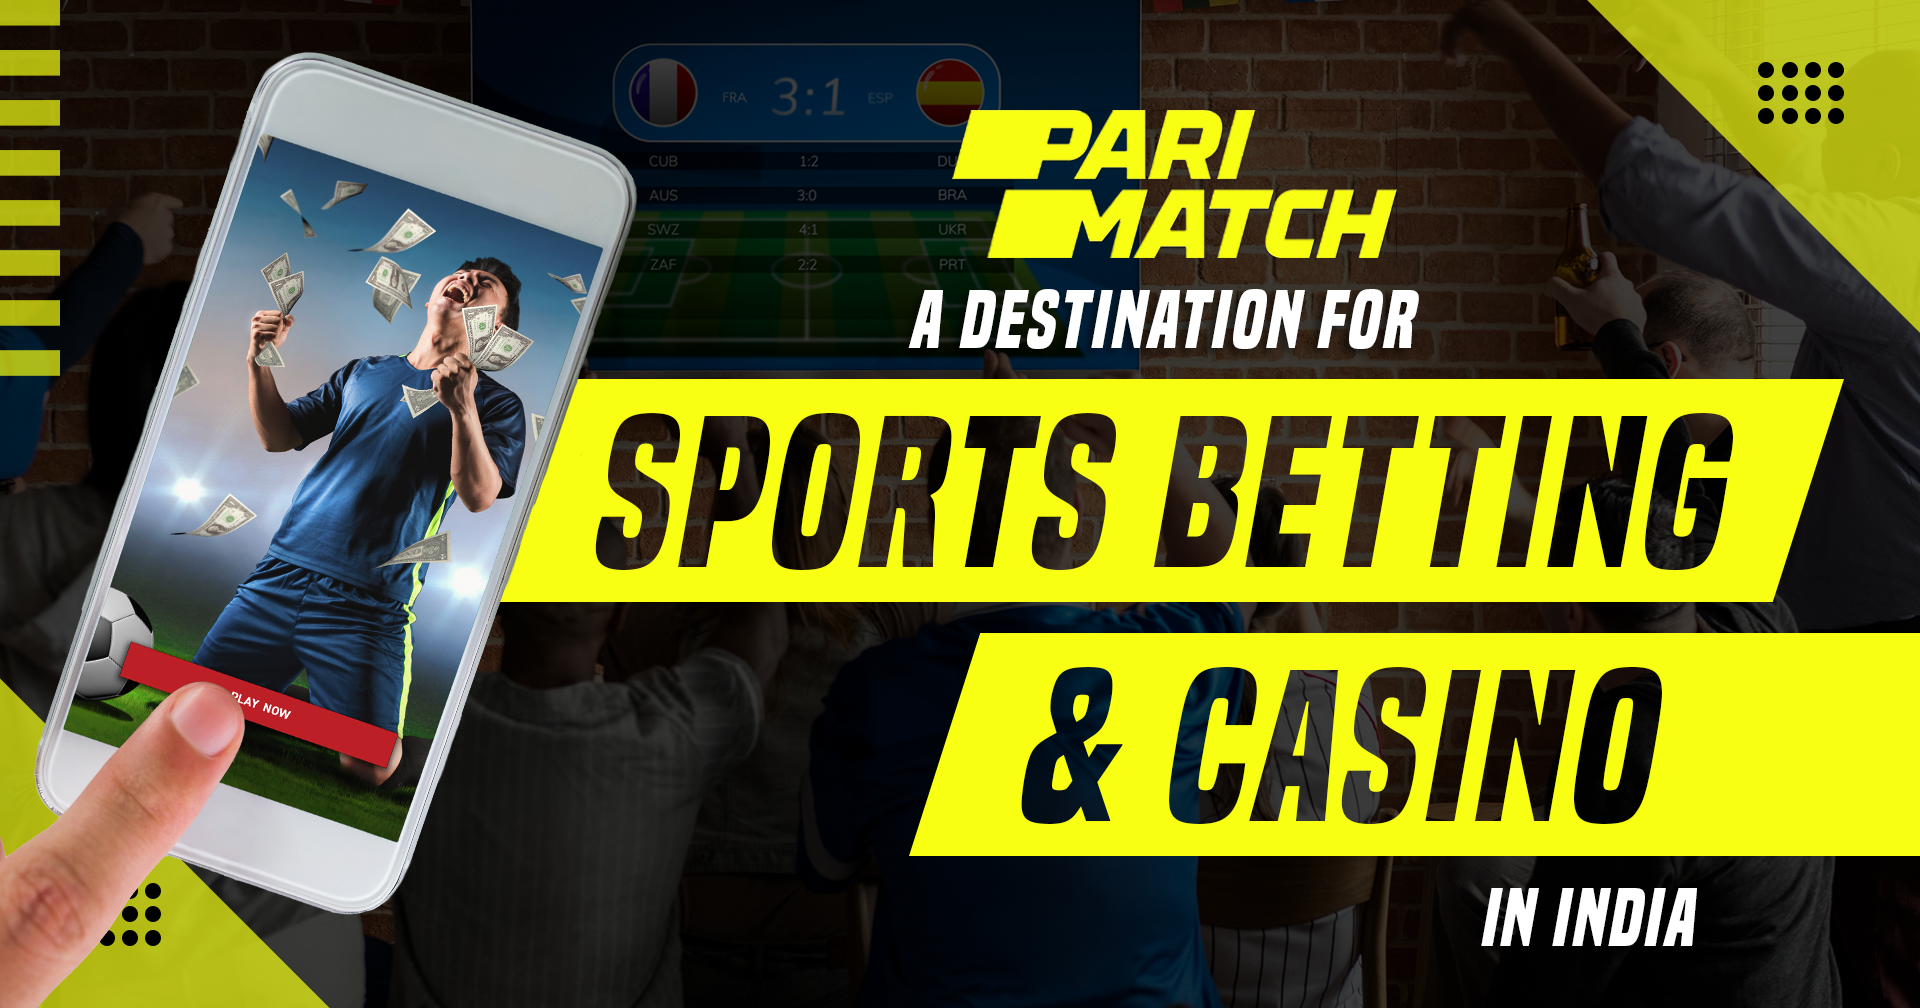 Parimatch – A Destination For Sports Betting And Casino In India - TIMES OF RISING